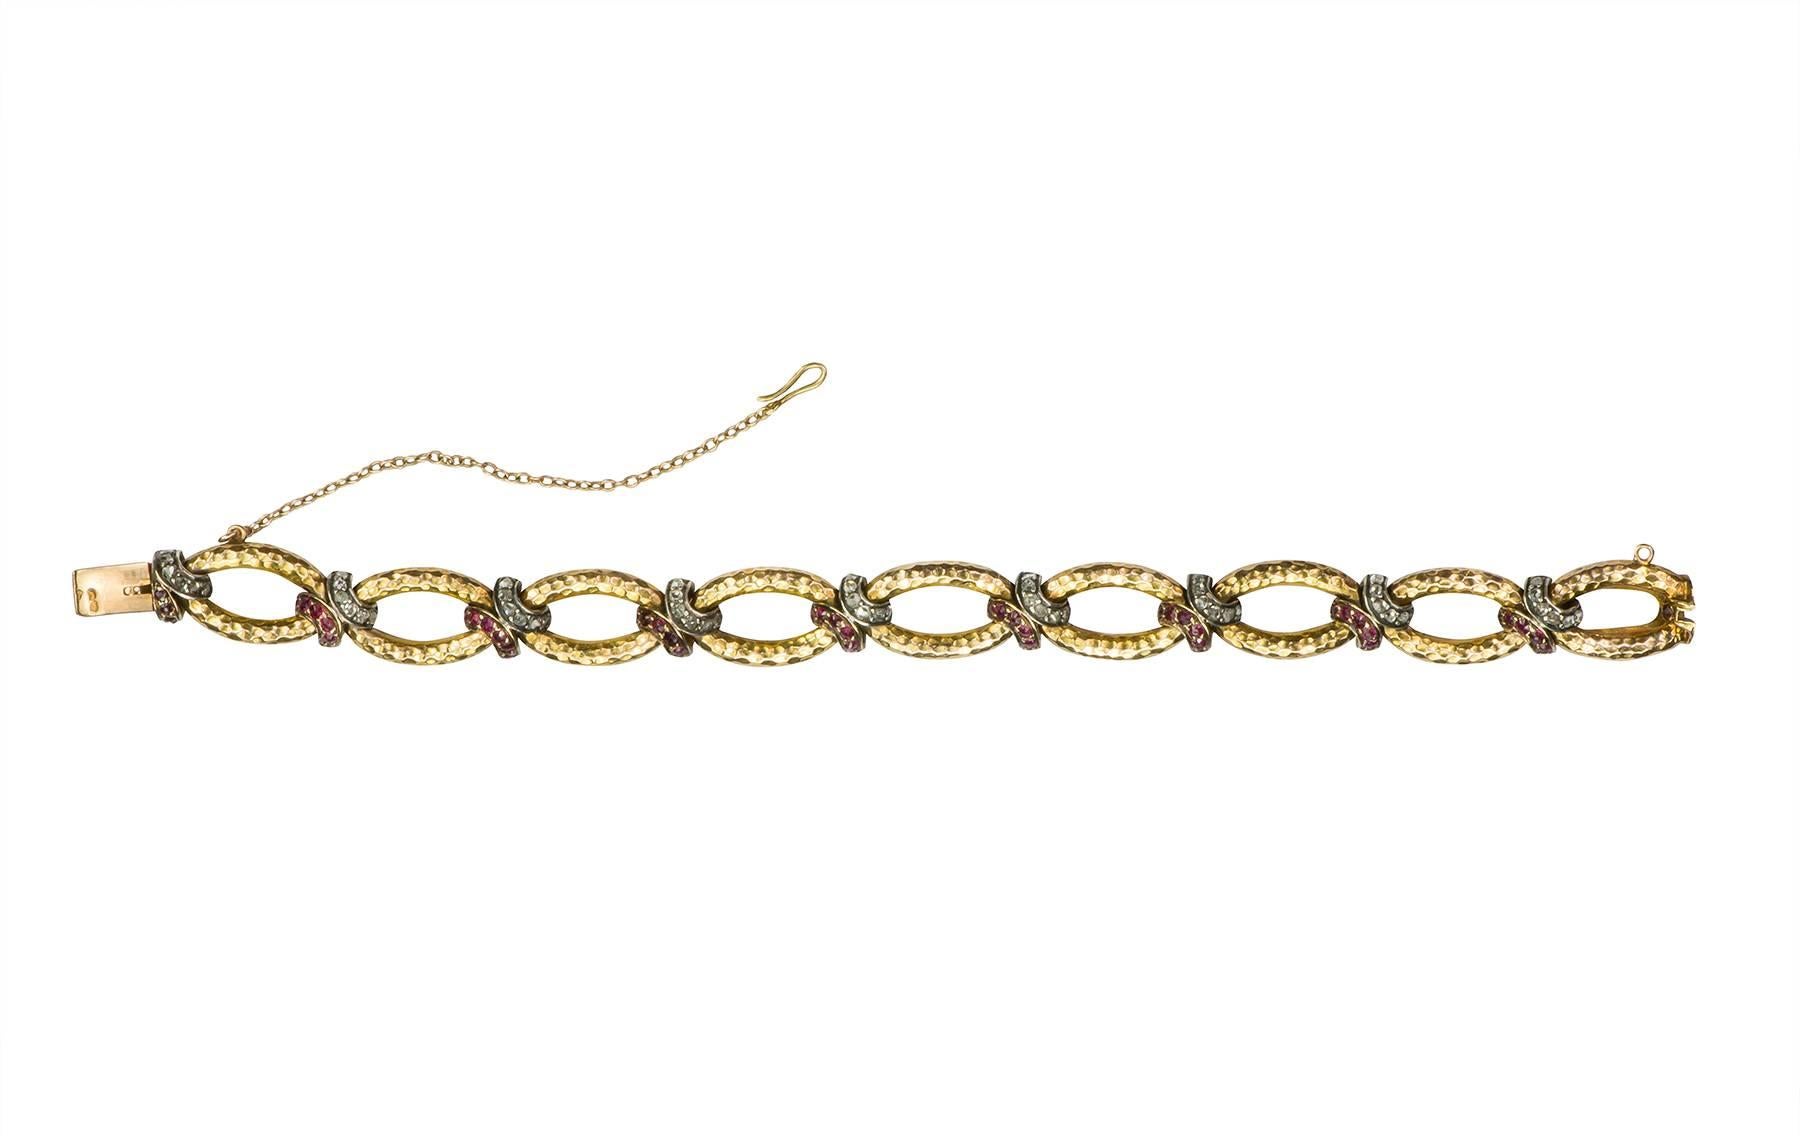 18k rose tone gold textured links, with 1.08cts in rose cut diamonds and 1.50cts in rose cut rubies, designed as bypasses between each link.  The bracelet was made circa 1880.

Hallmark:  (French)
Length:  6.75 inches